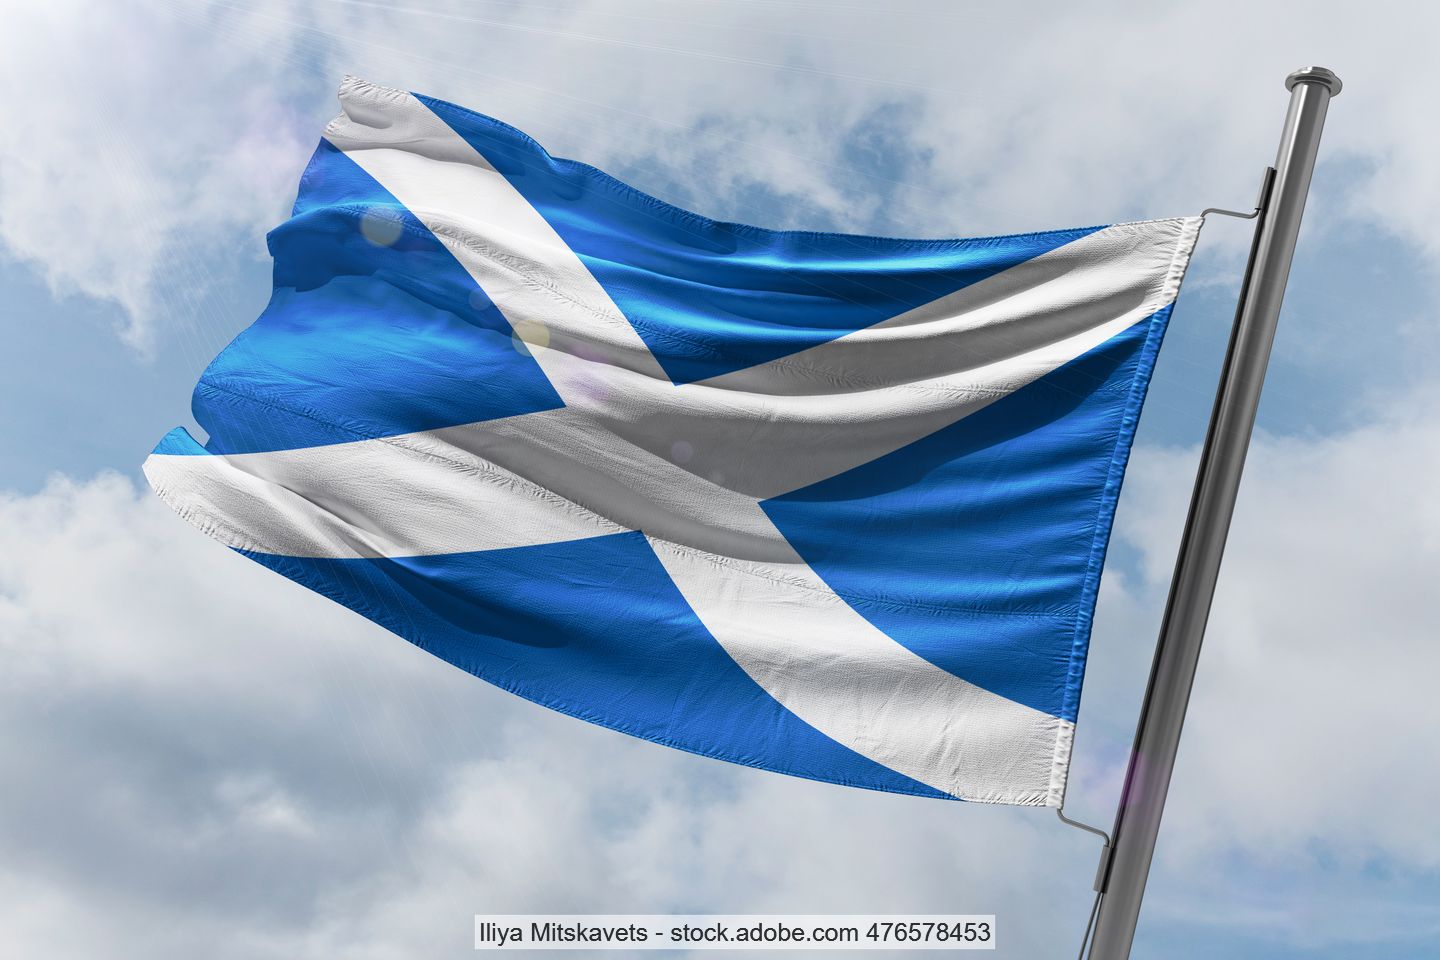 Scottish blue and white flag on a staff blowing in the wind.